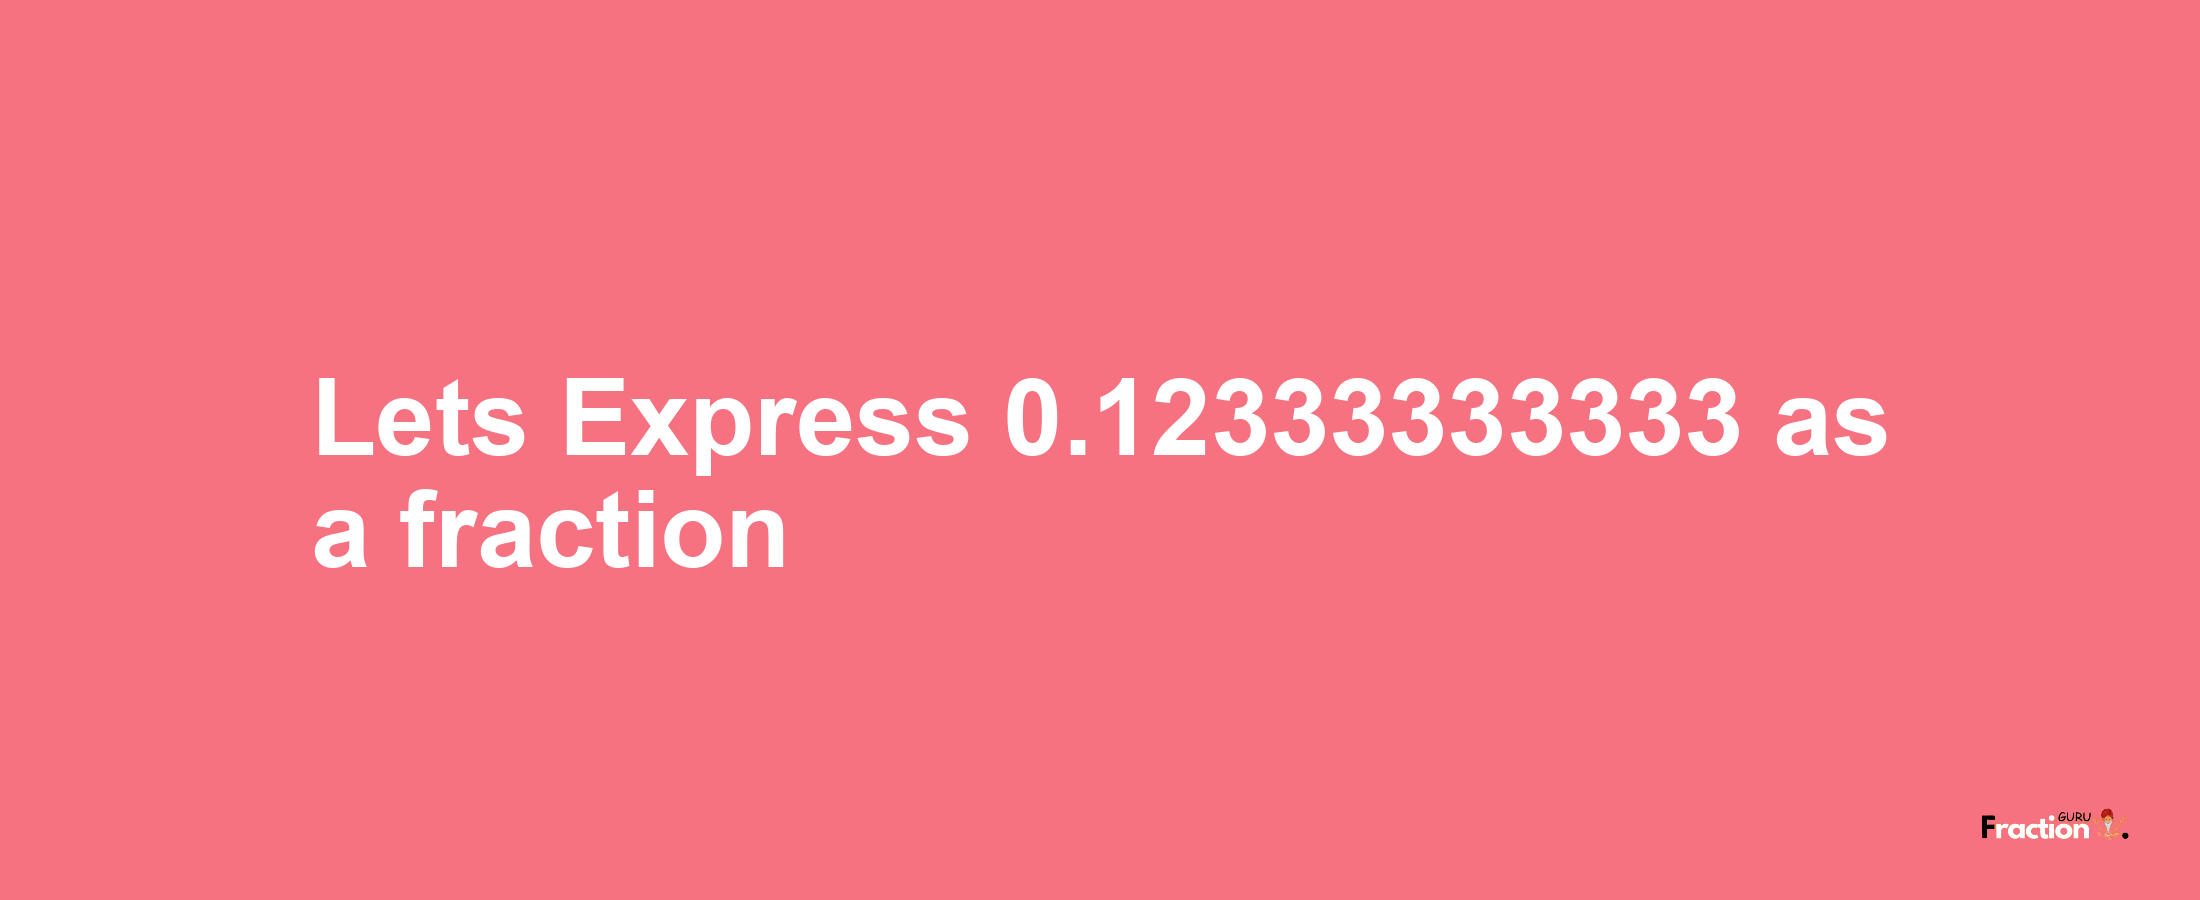 Lets Express 0.12333333333 as afraction